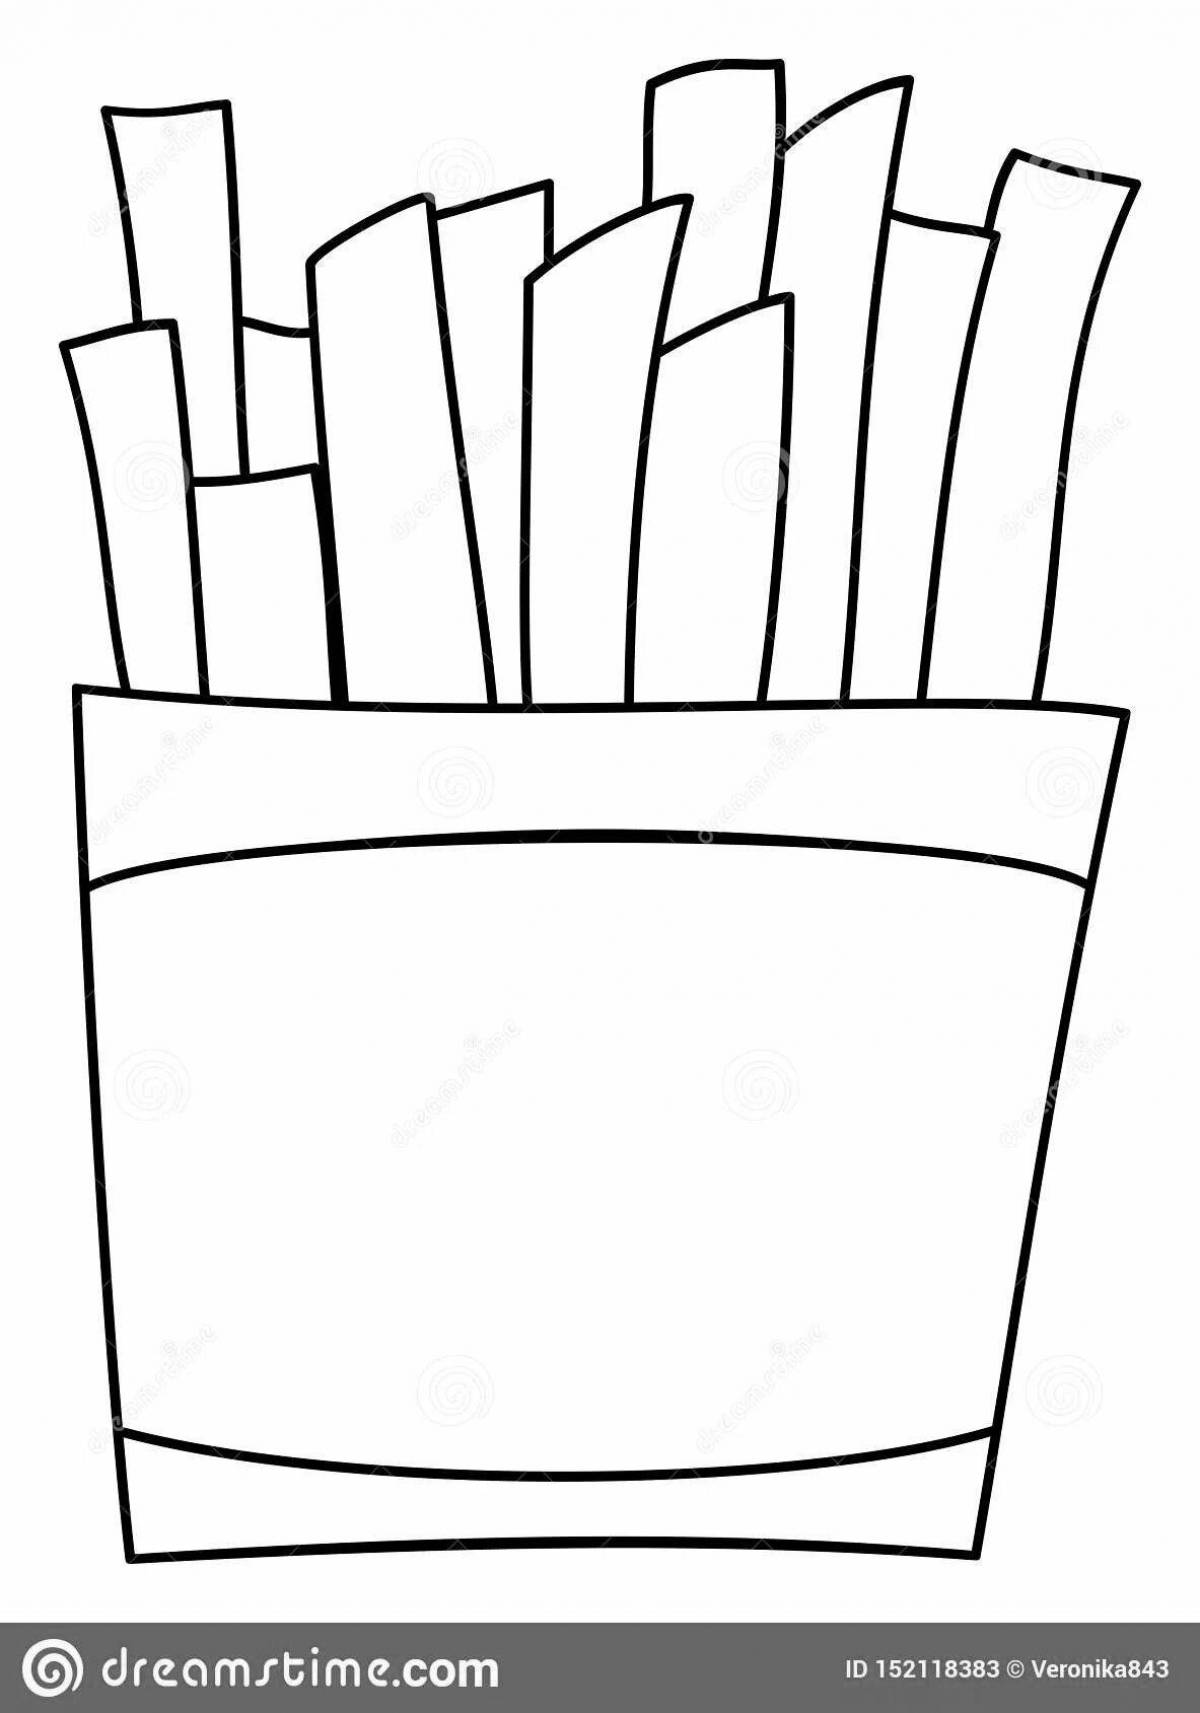 Delicious french fries coloring page